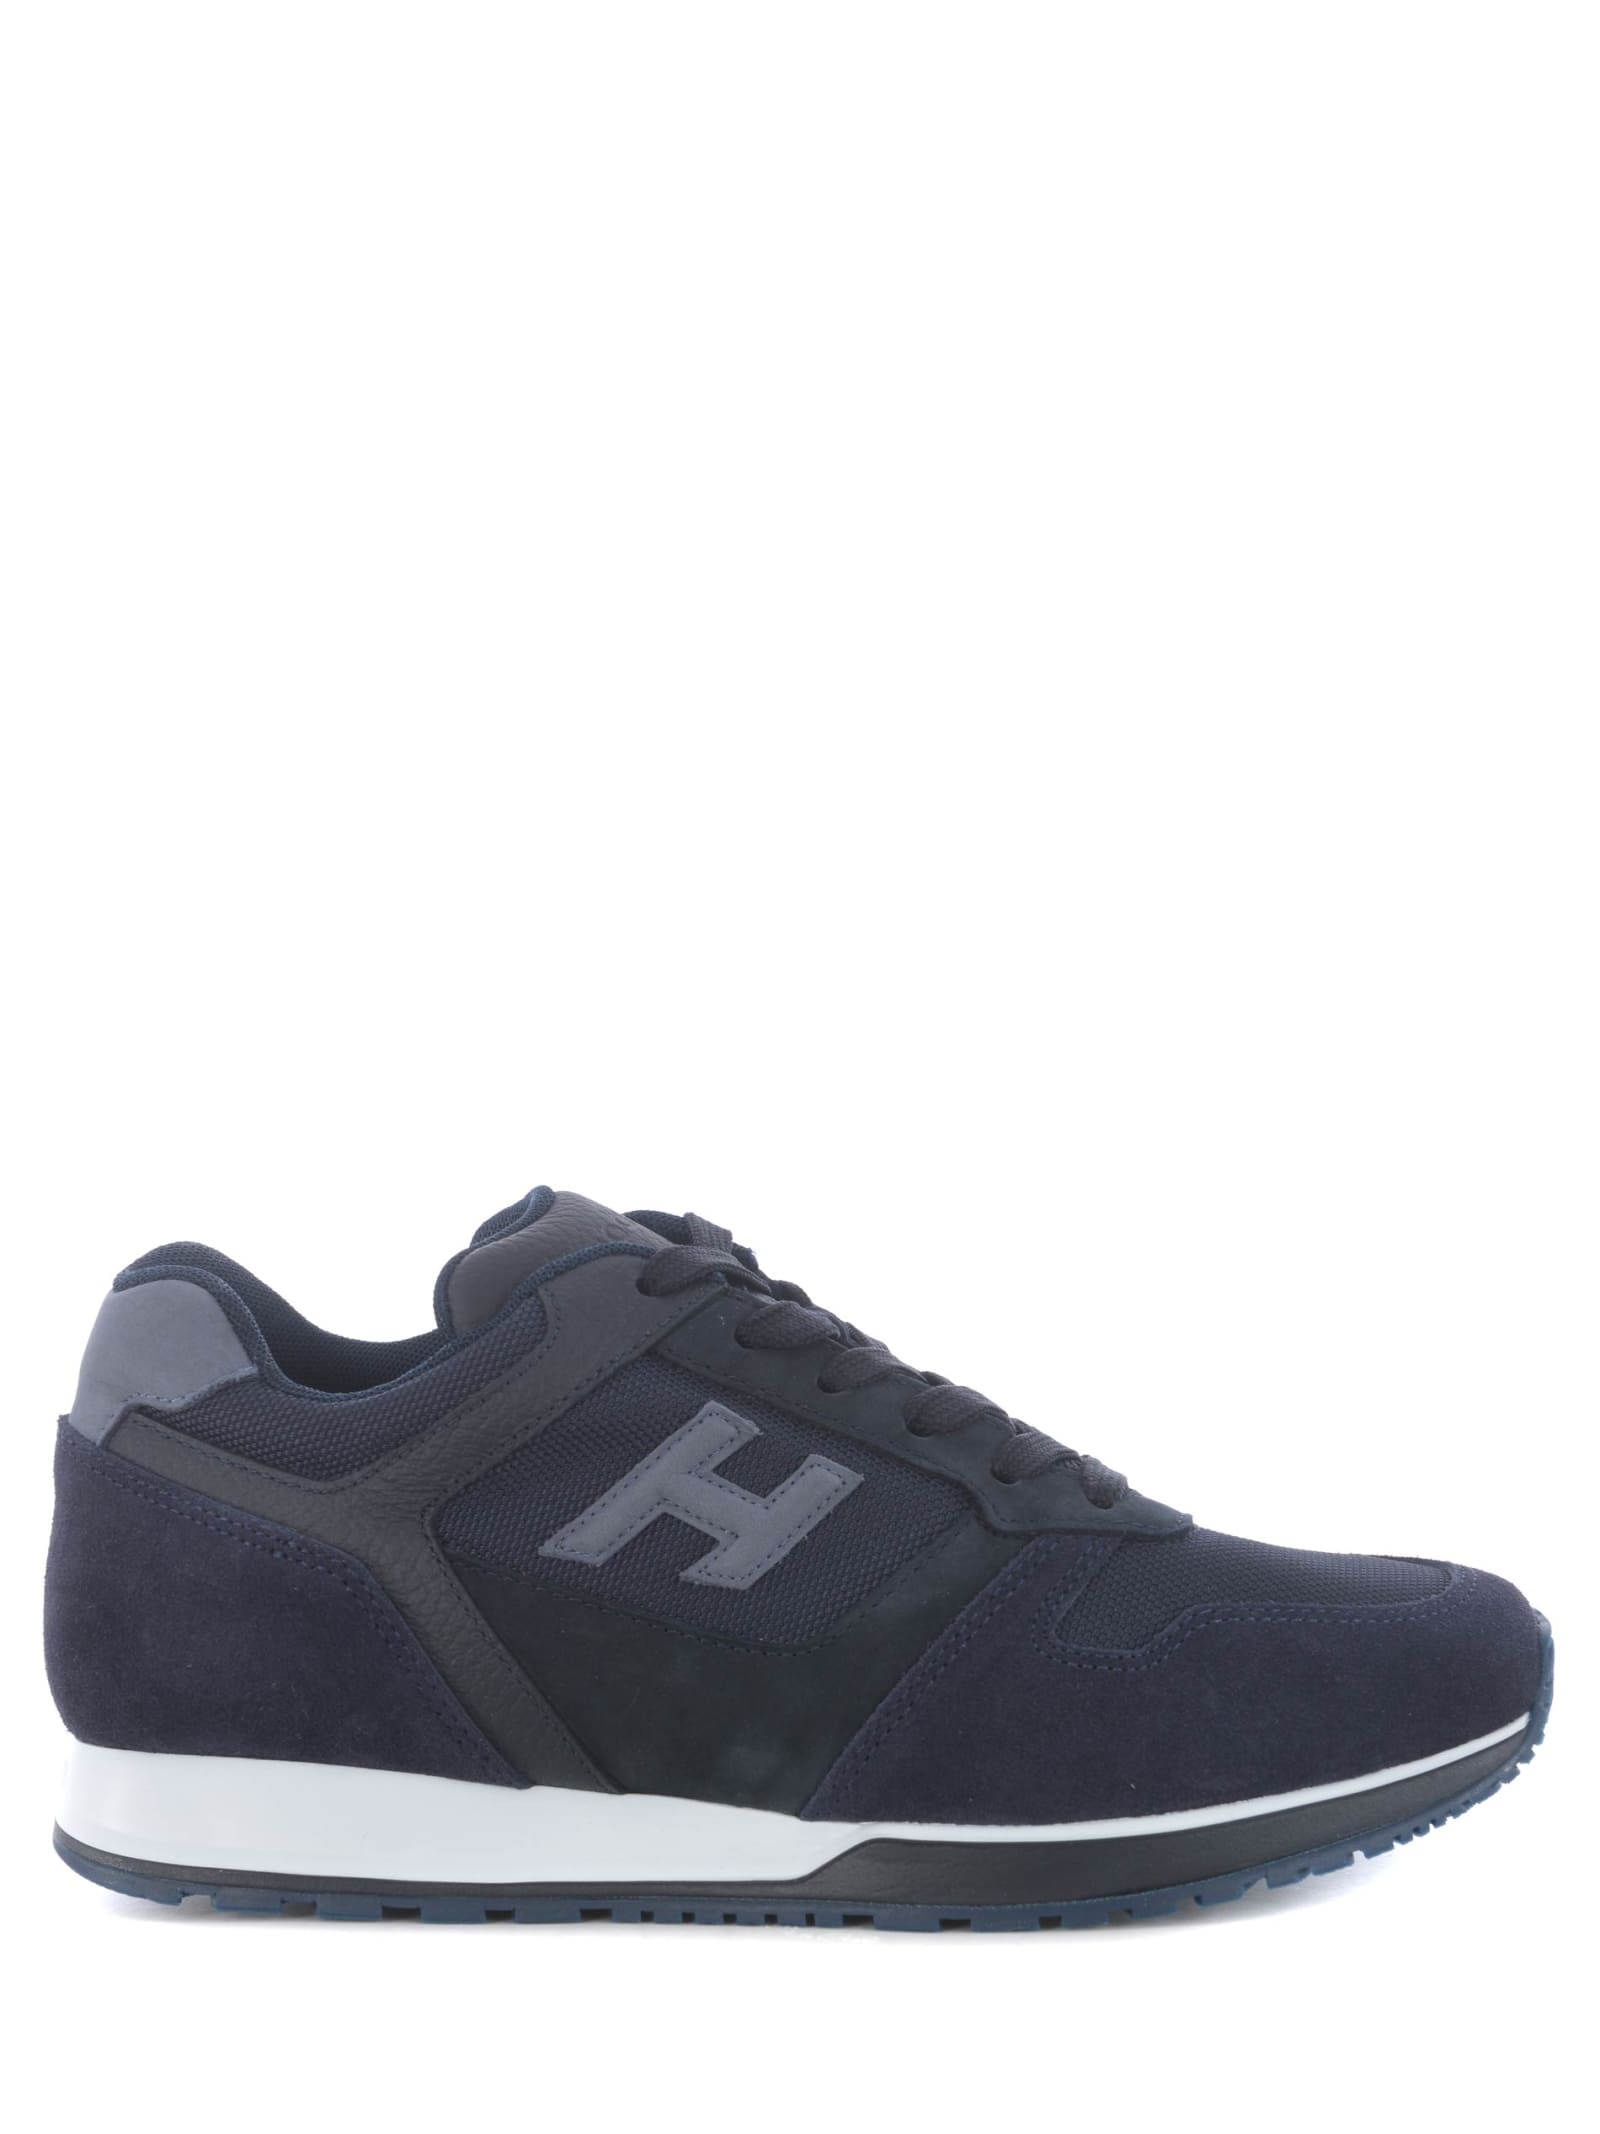 Hogan h321 Sneakers In Suede And Mesh Nylon